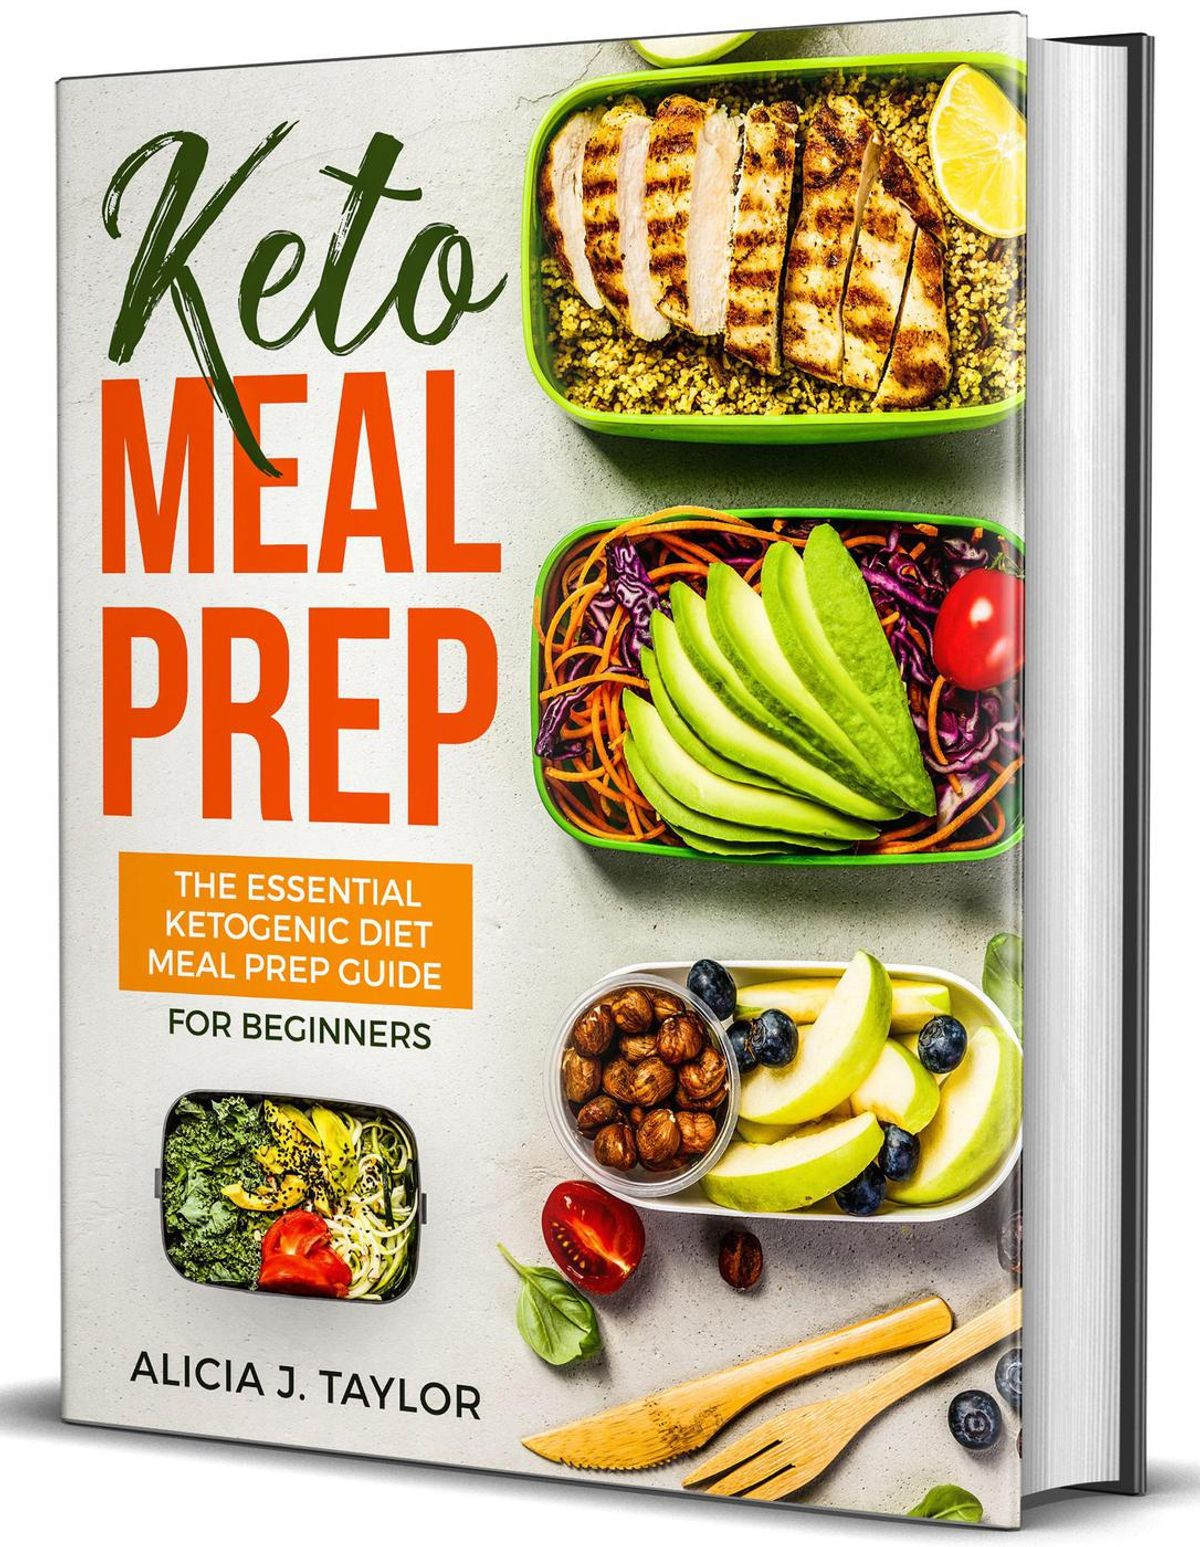 Keto Diet For Beginners Meal Prep
 Keto Meal Prep the essential Ketogenic Meal prep Guide